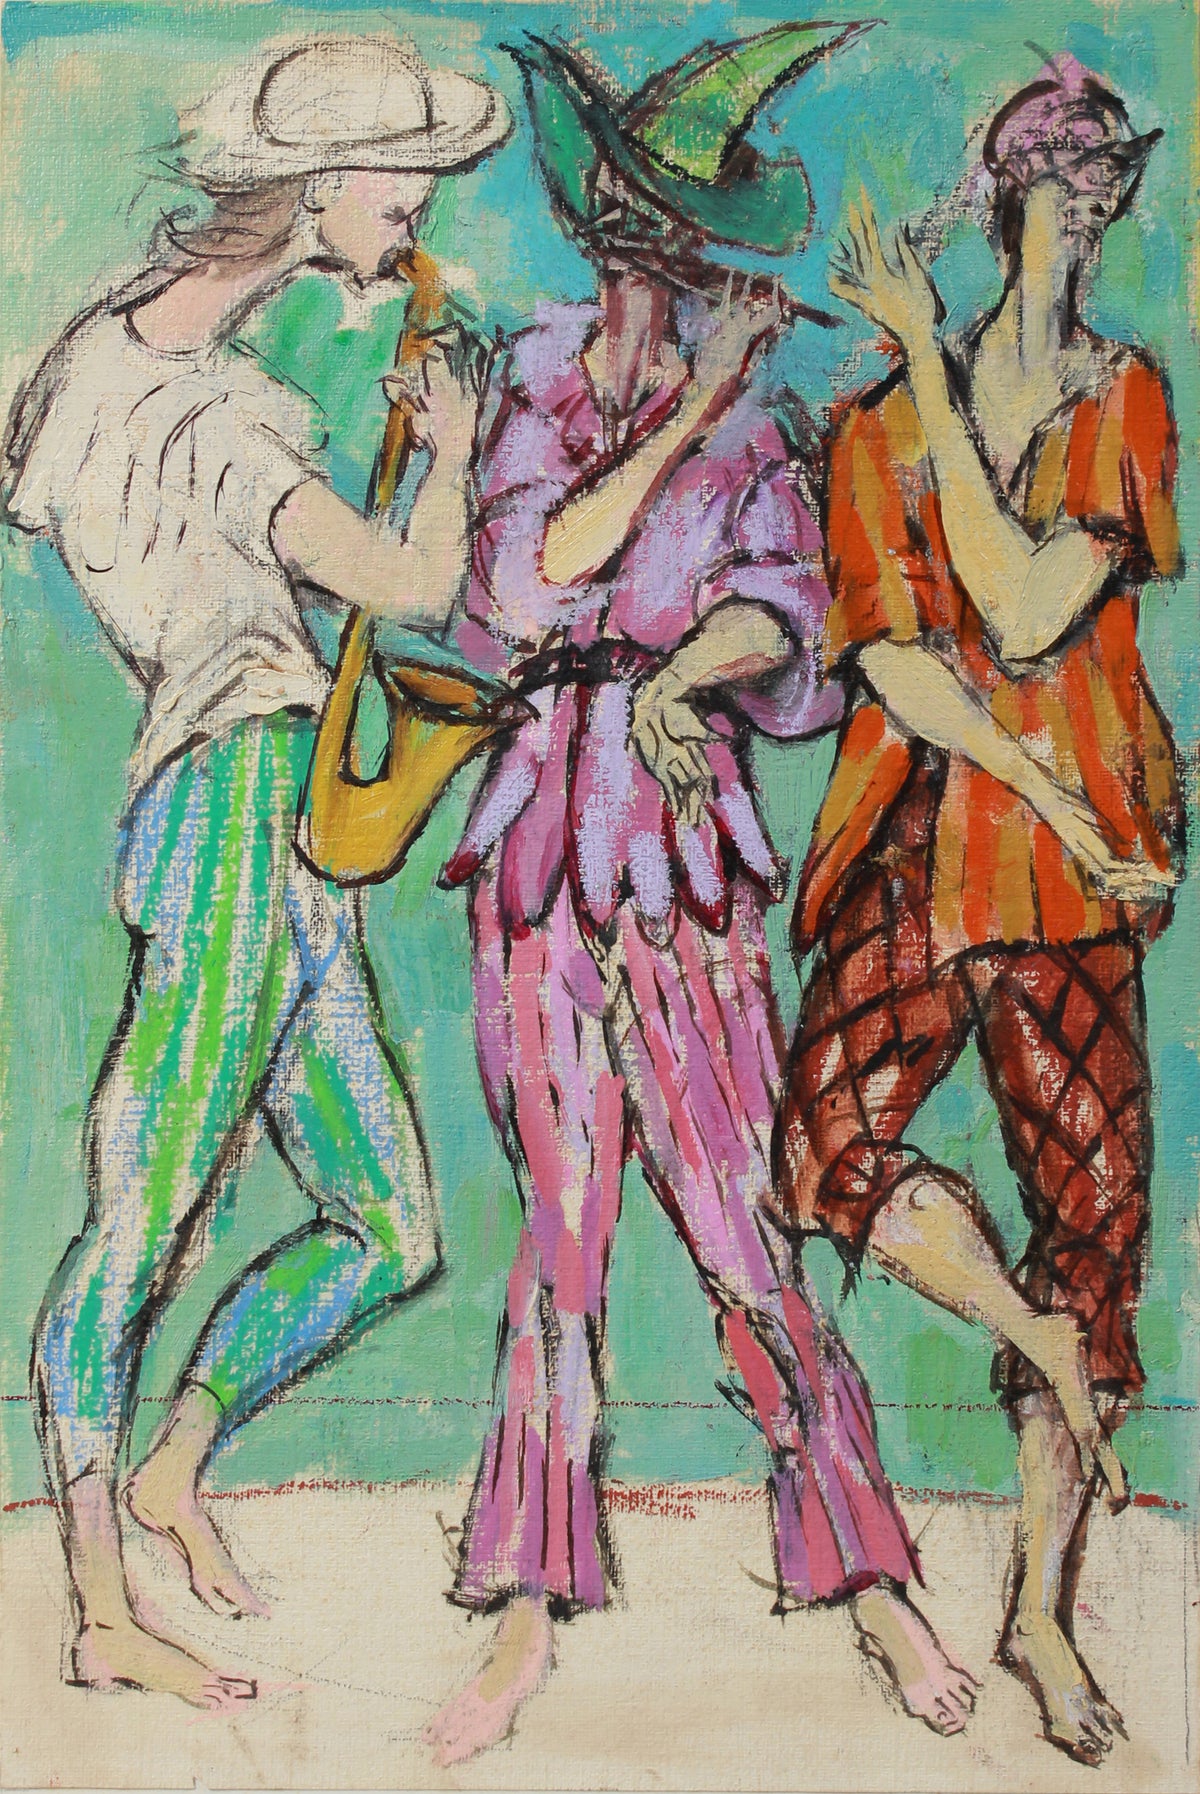 &lt;i&gt;Musicians 2&lt;/i&gt; &lt;br&gt;1970s Oil &lt;br&gt;&lt;br&gt;#A9133